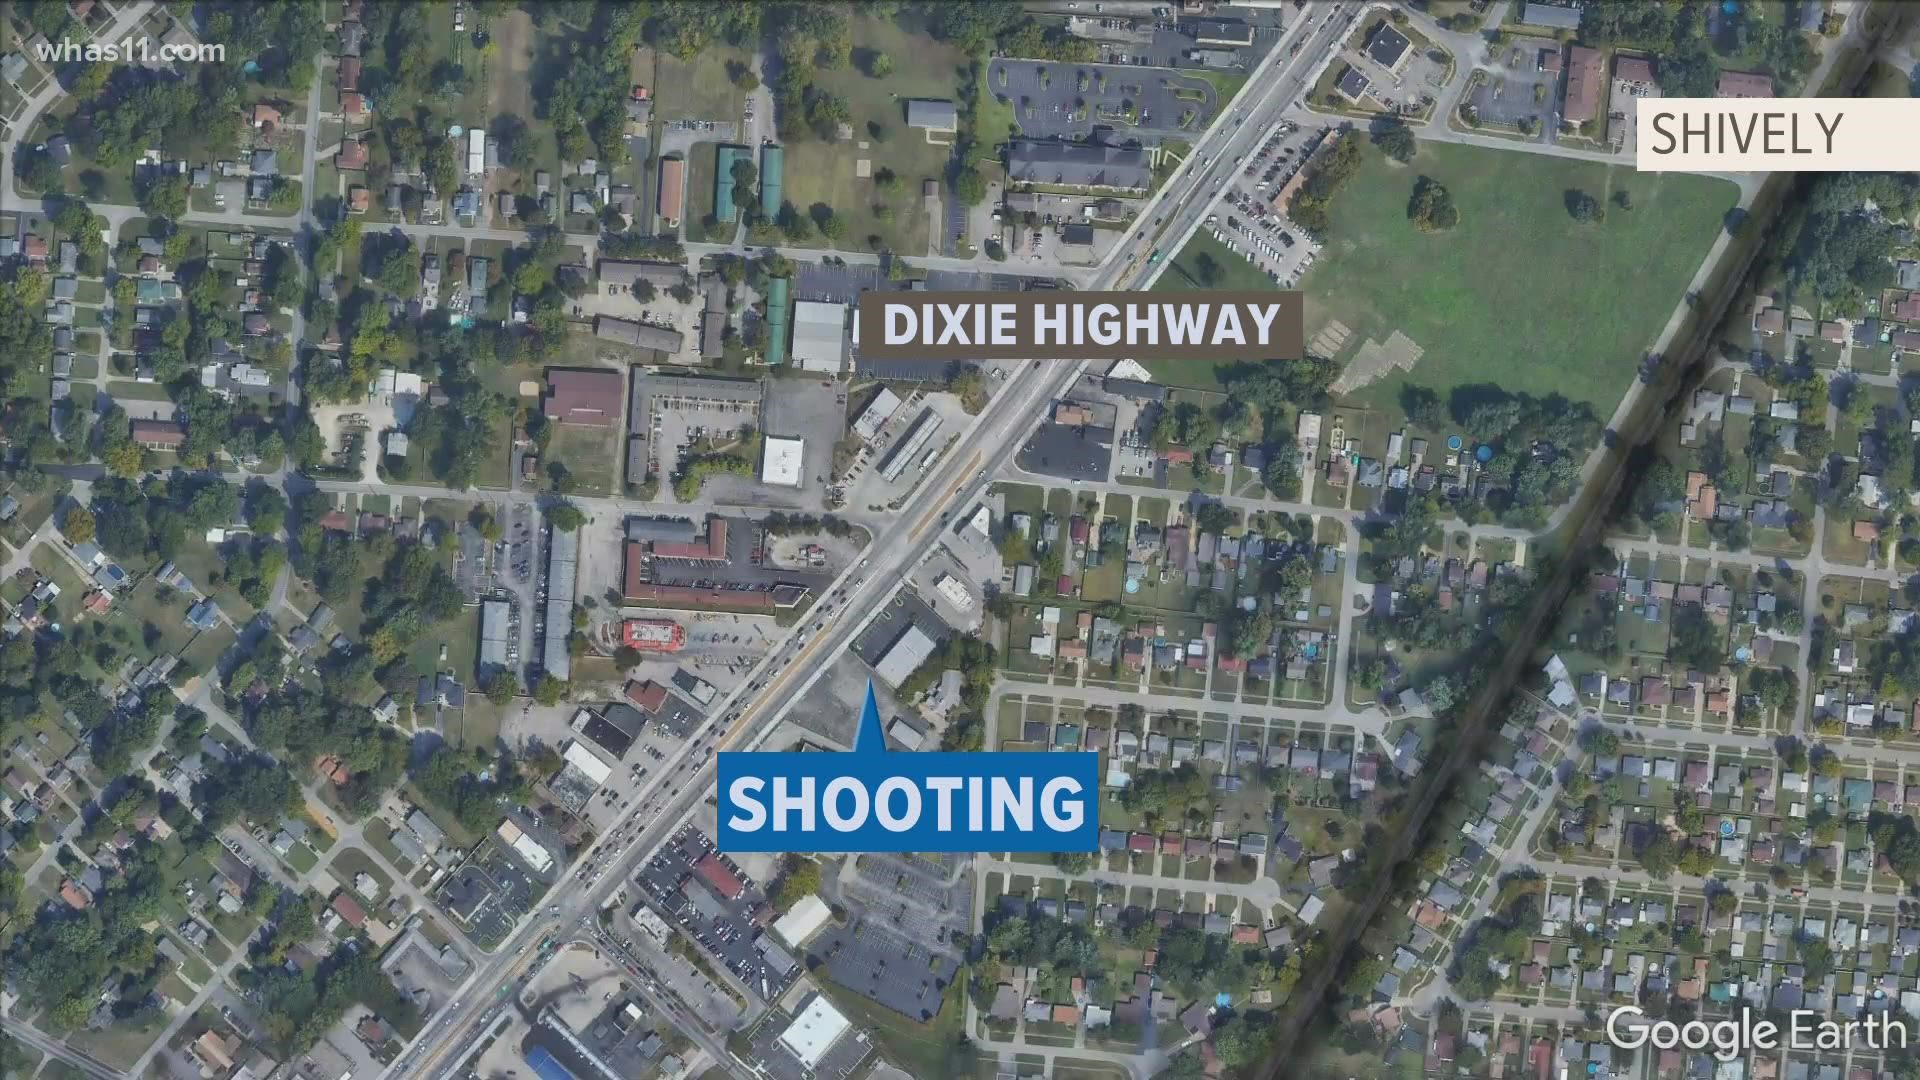 Police are investigating after a man was found in the 4500 block of Dixie Highway shot to death while on his bike.